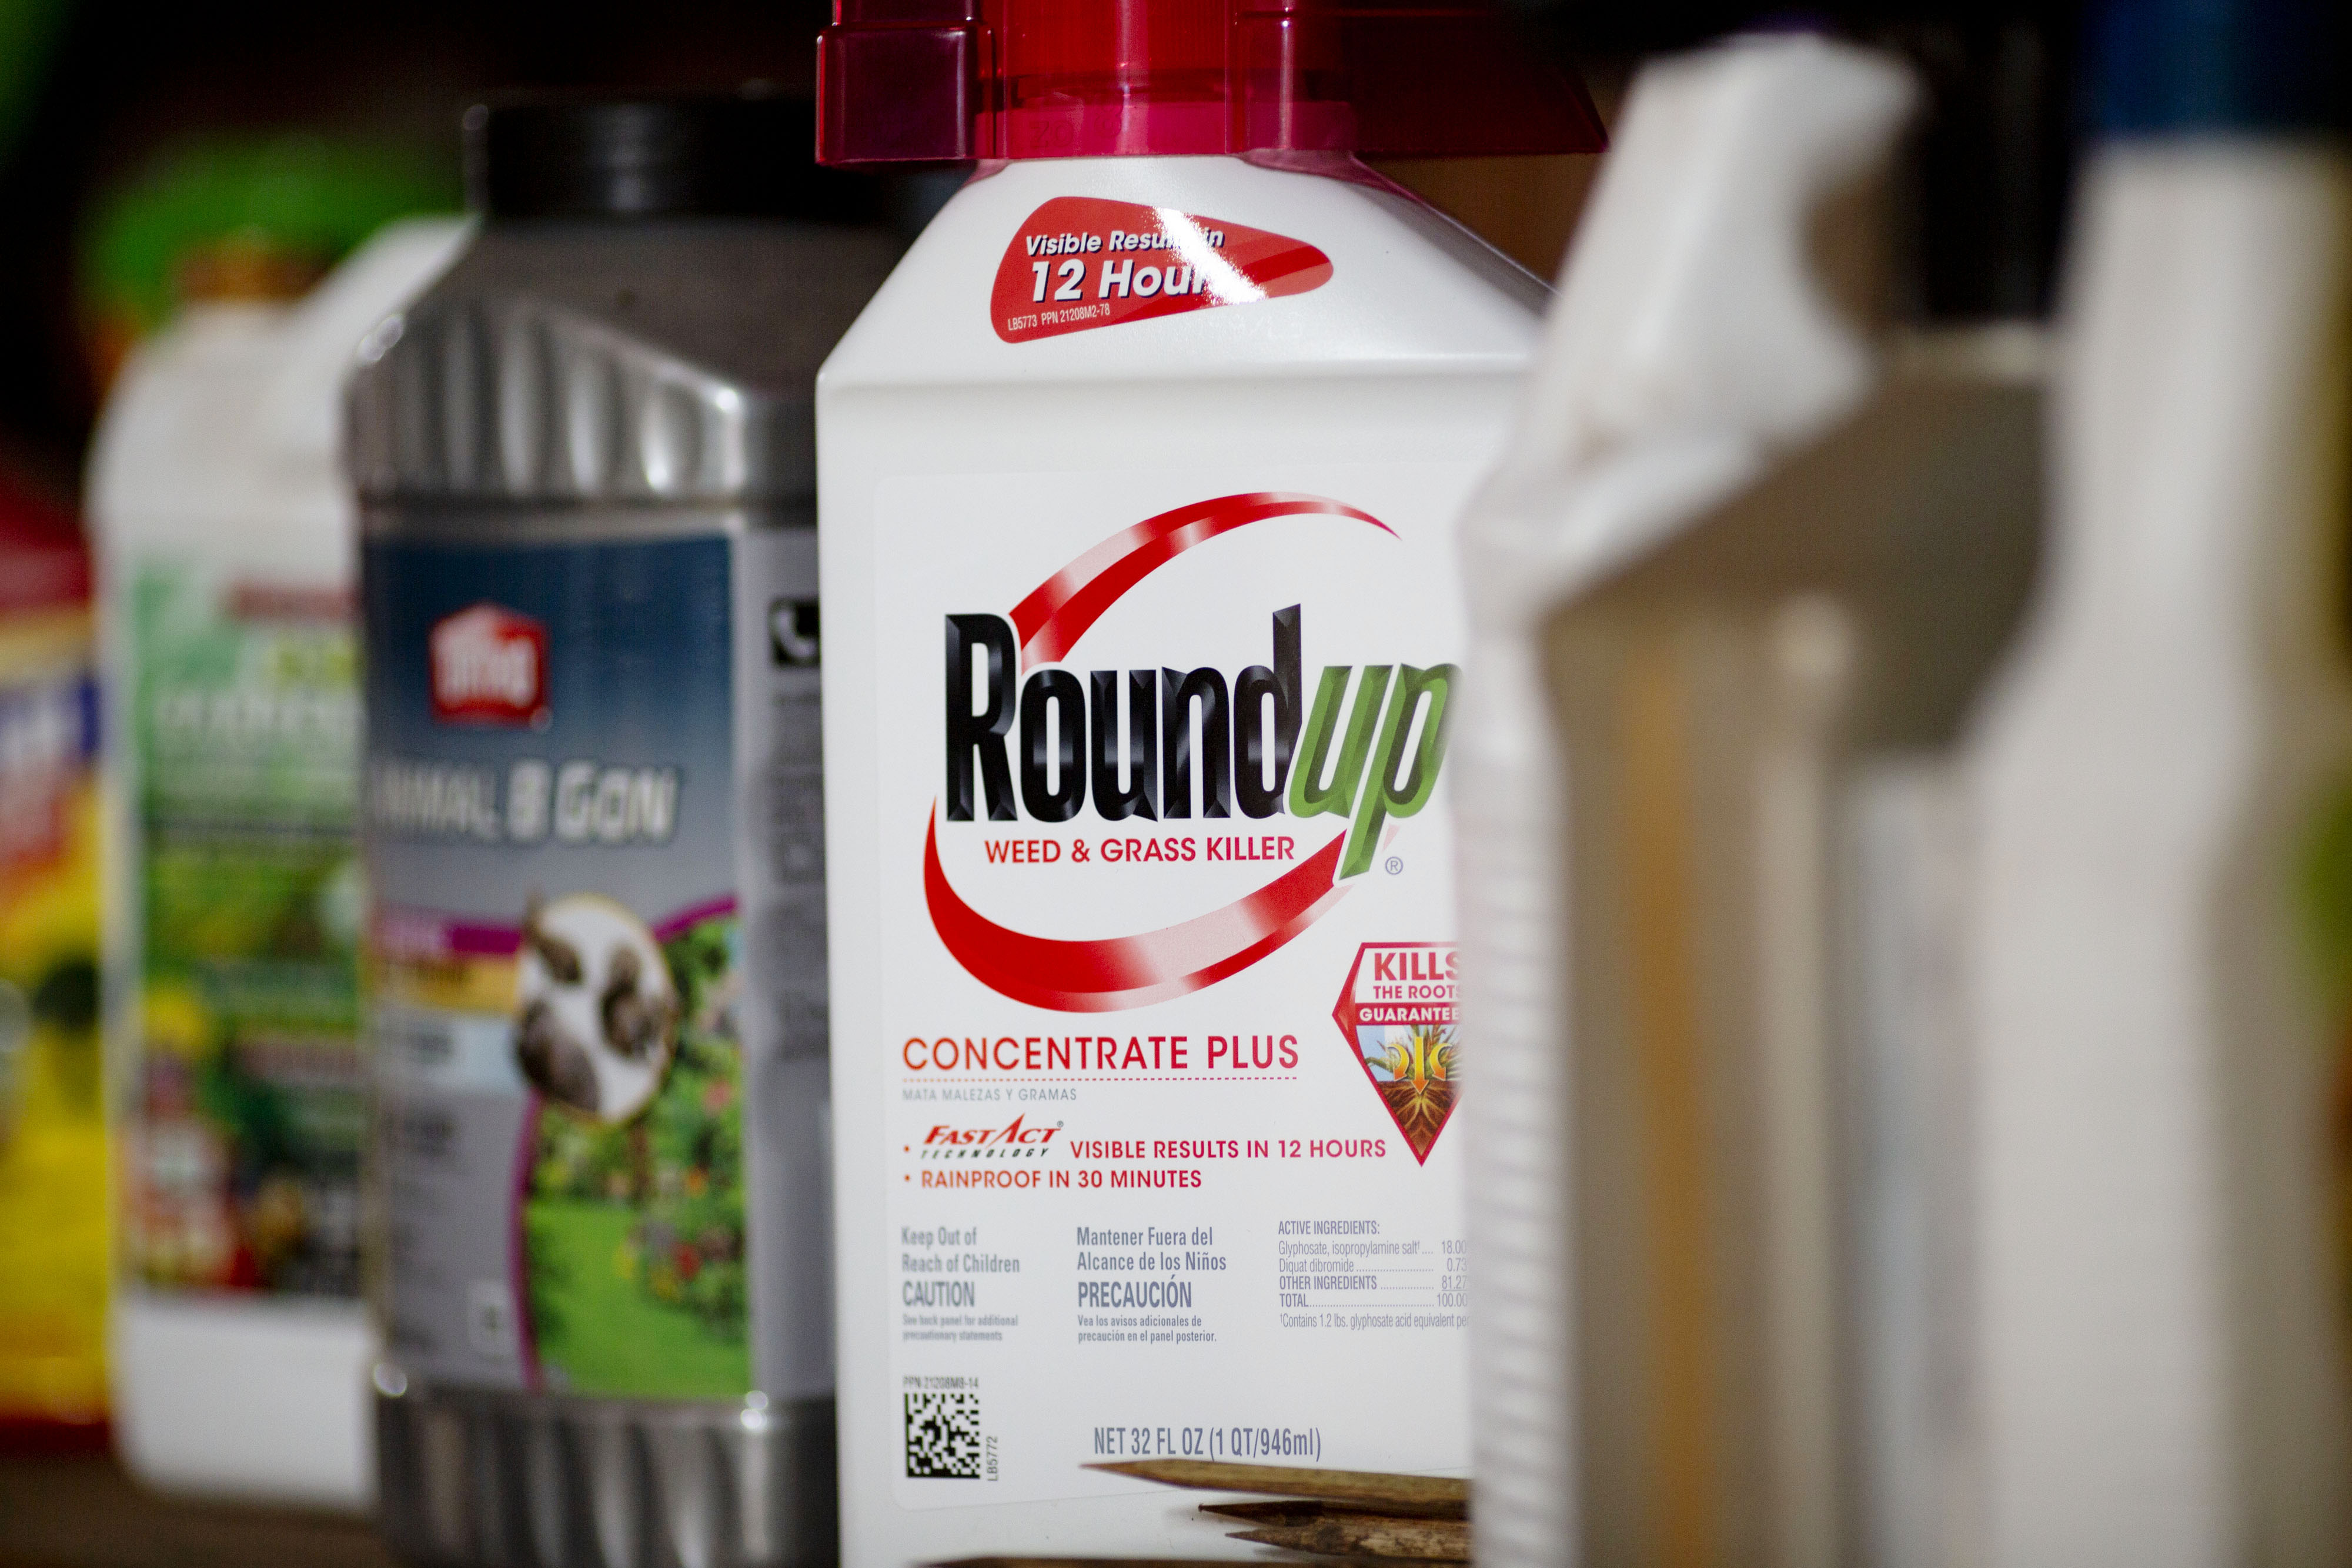 Bayer will stop selling Roundup for residential use in 2023, an effort to  prevent future cancer lawsuits